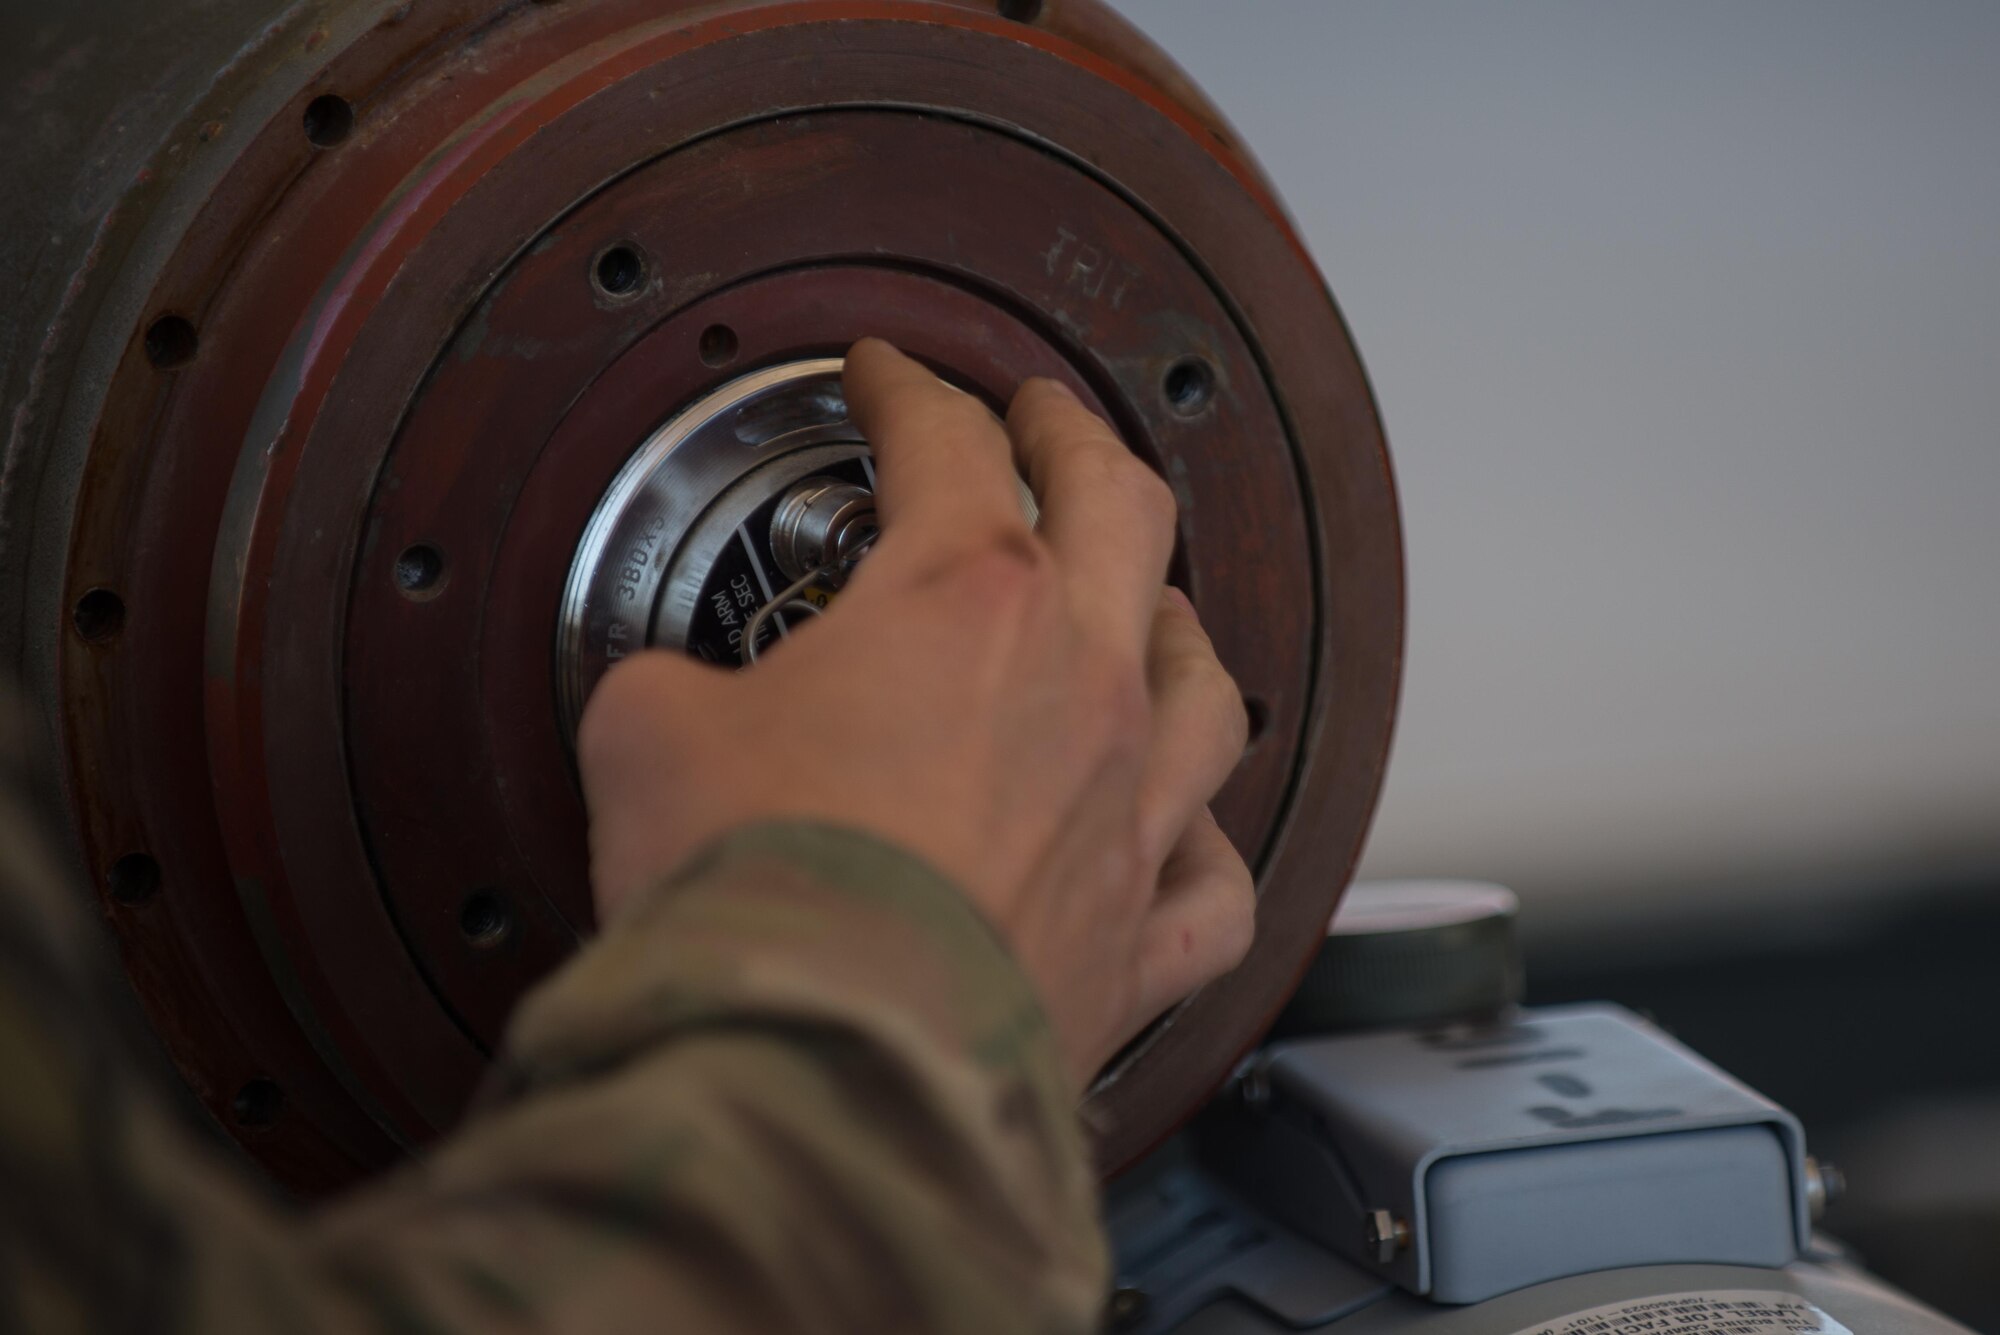 A U.S. Airman assigned to the 455th Expeditionary Maintenance Squadron Munitions Flight performs a six month inspection on Guided Bomb Unit-54 (GBU-54) munition at Bagram Airfield, Afghanistan, June 15, 2015. The 455th EMXS Munitions Flight ensures that every munition loaded onto an F-16 Fighting Falcon will perform as expected when used. (U.S. Air Force photo by Tech. Sgt. Joseph Swafford/Released)